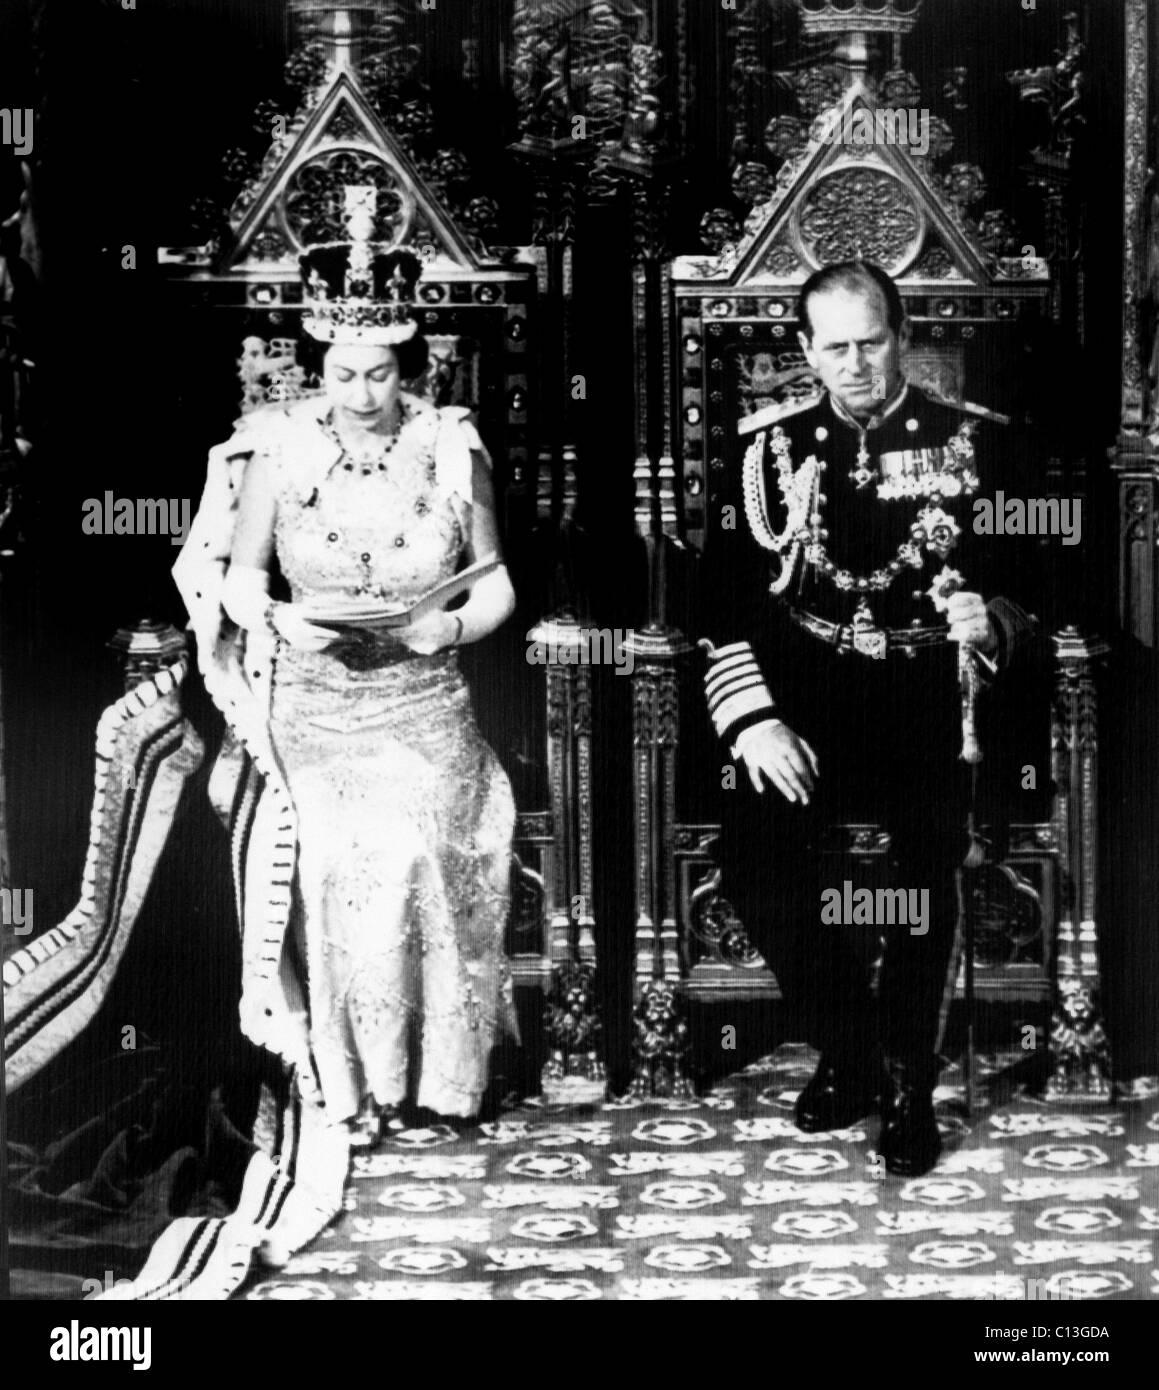 Queen Elizabeth II, and her husband and consort, Prince Philip, as the Queen announces that the Labor government will nationalize Britain's shipbuilding and aircraft industries, during the opening of Parliament in the Chamber in the House of Lords, October 29, 1974. Stock Photo